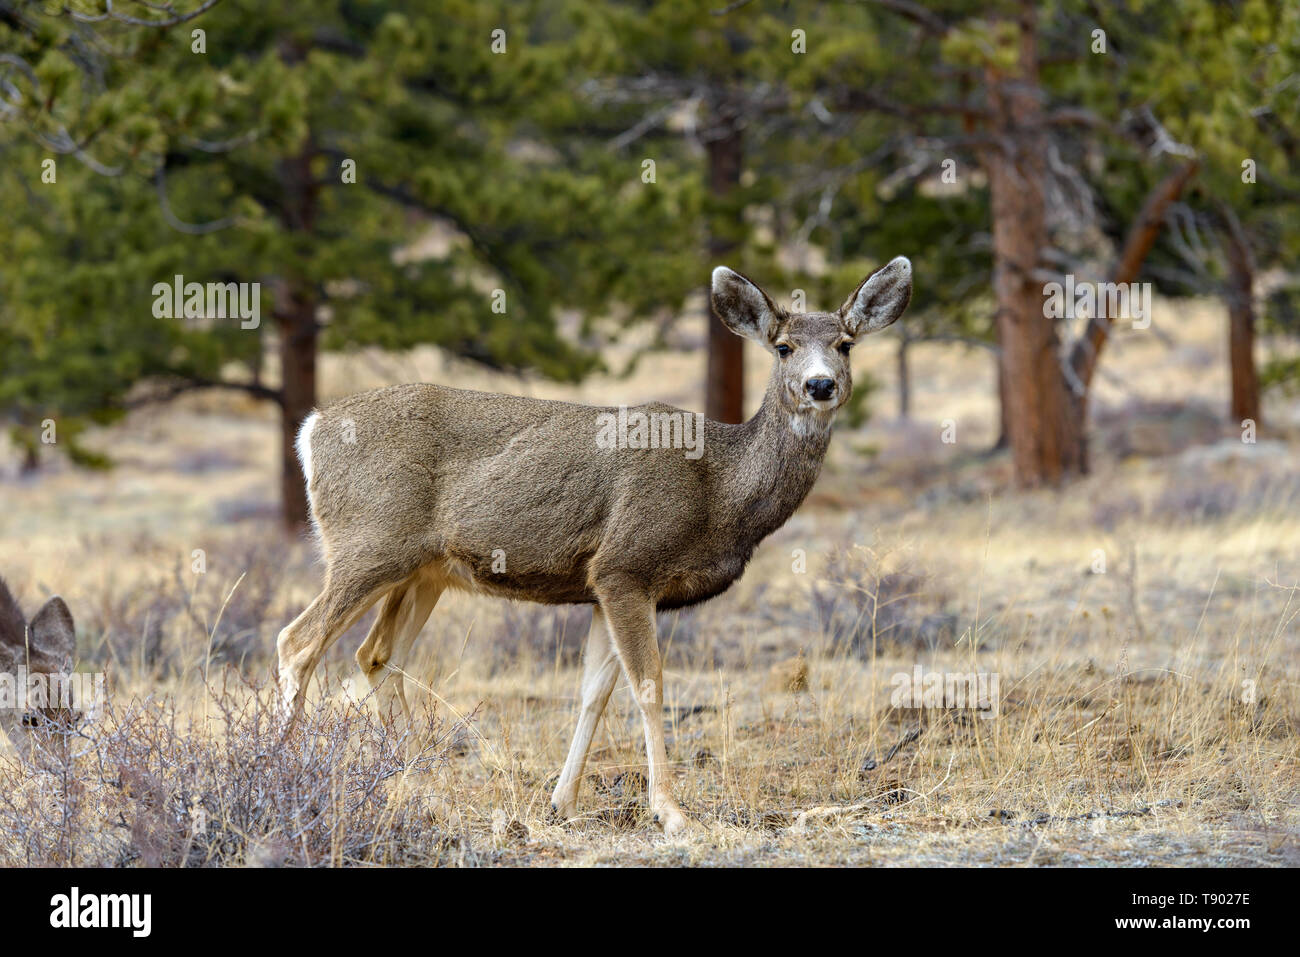 Mule Deer - A mule deer standing alerted in a pine forest. Early Spring in Rocky Mountain National Park, Colorado, USA. Stock Photo